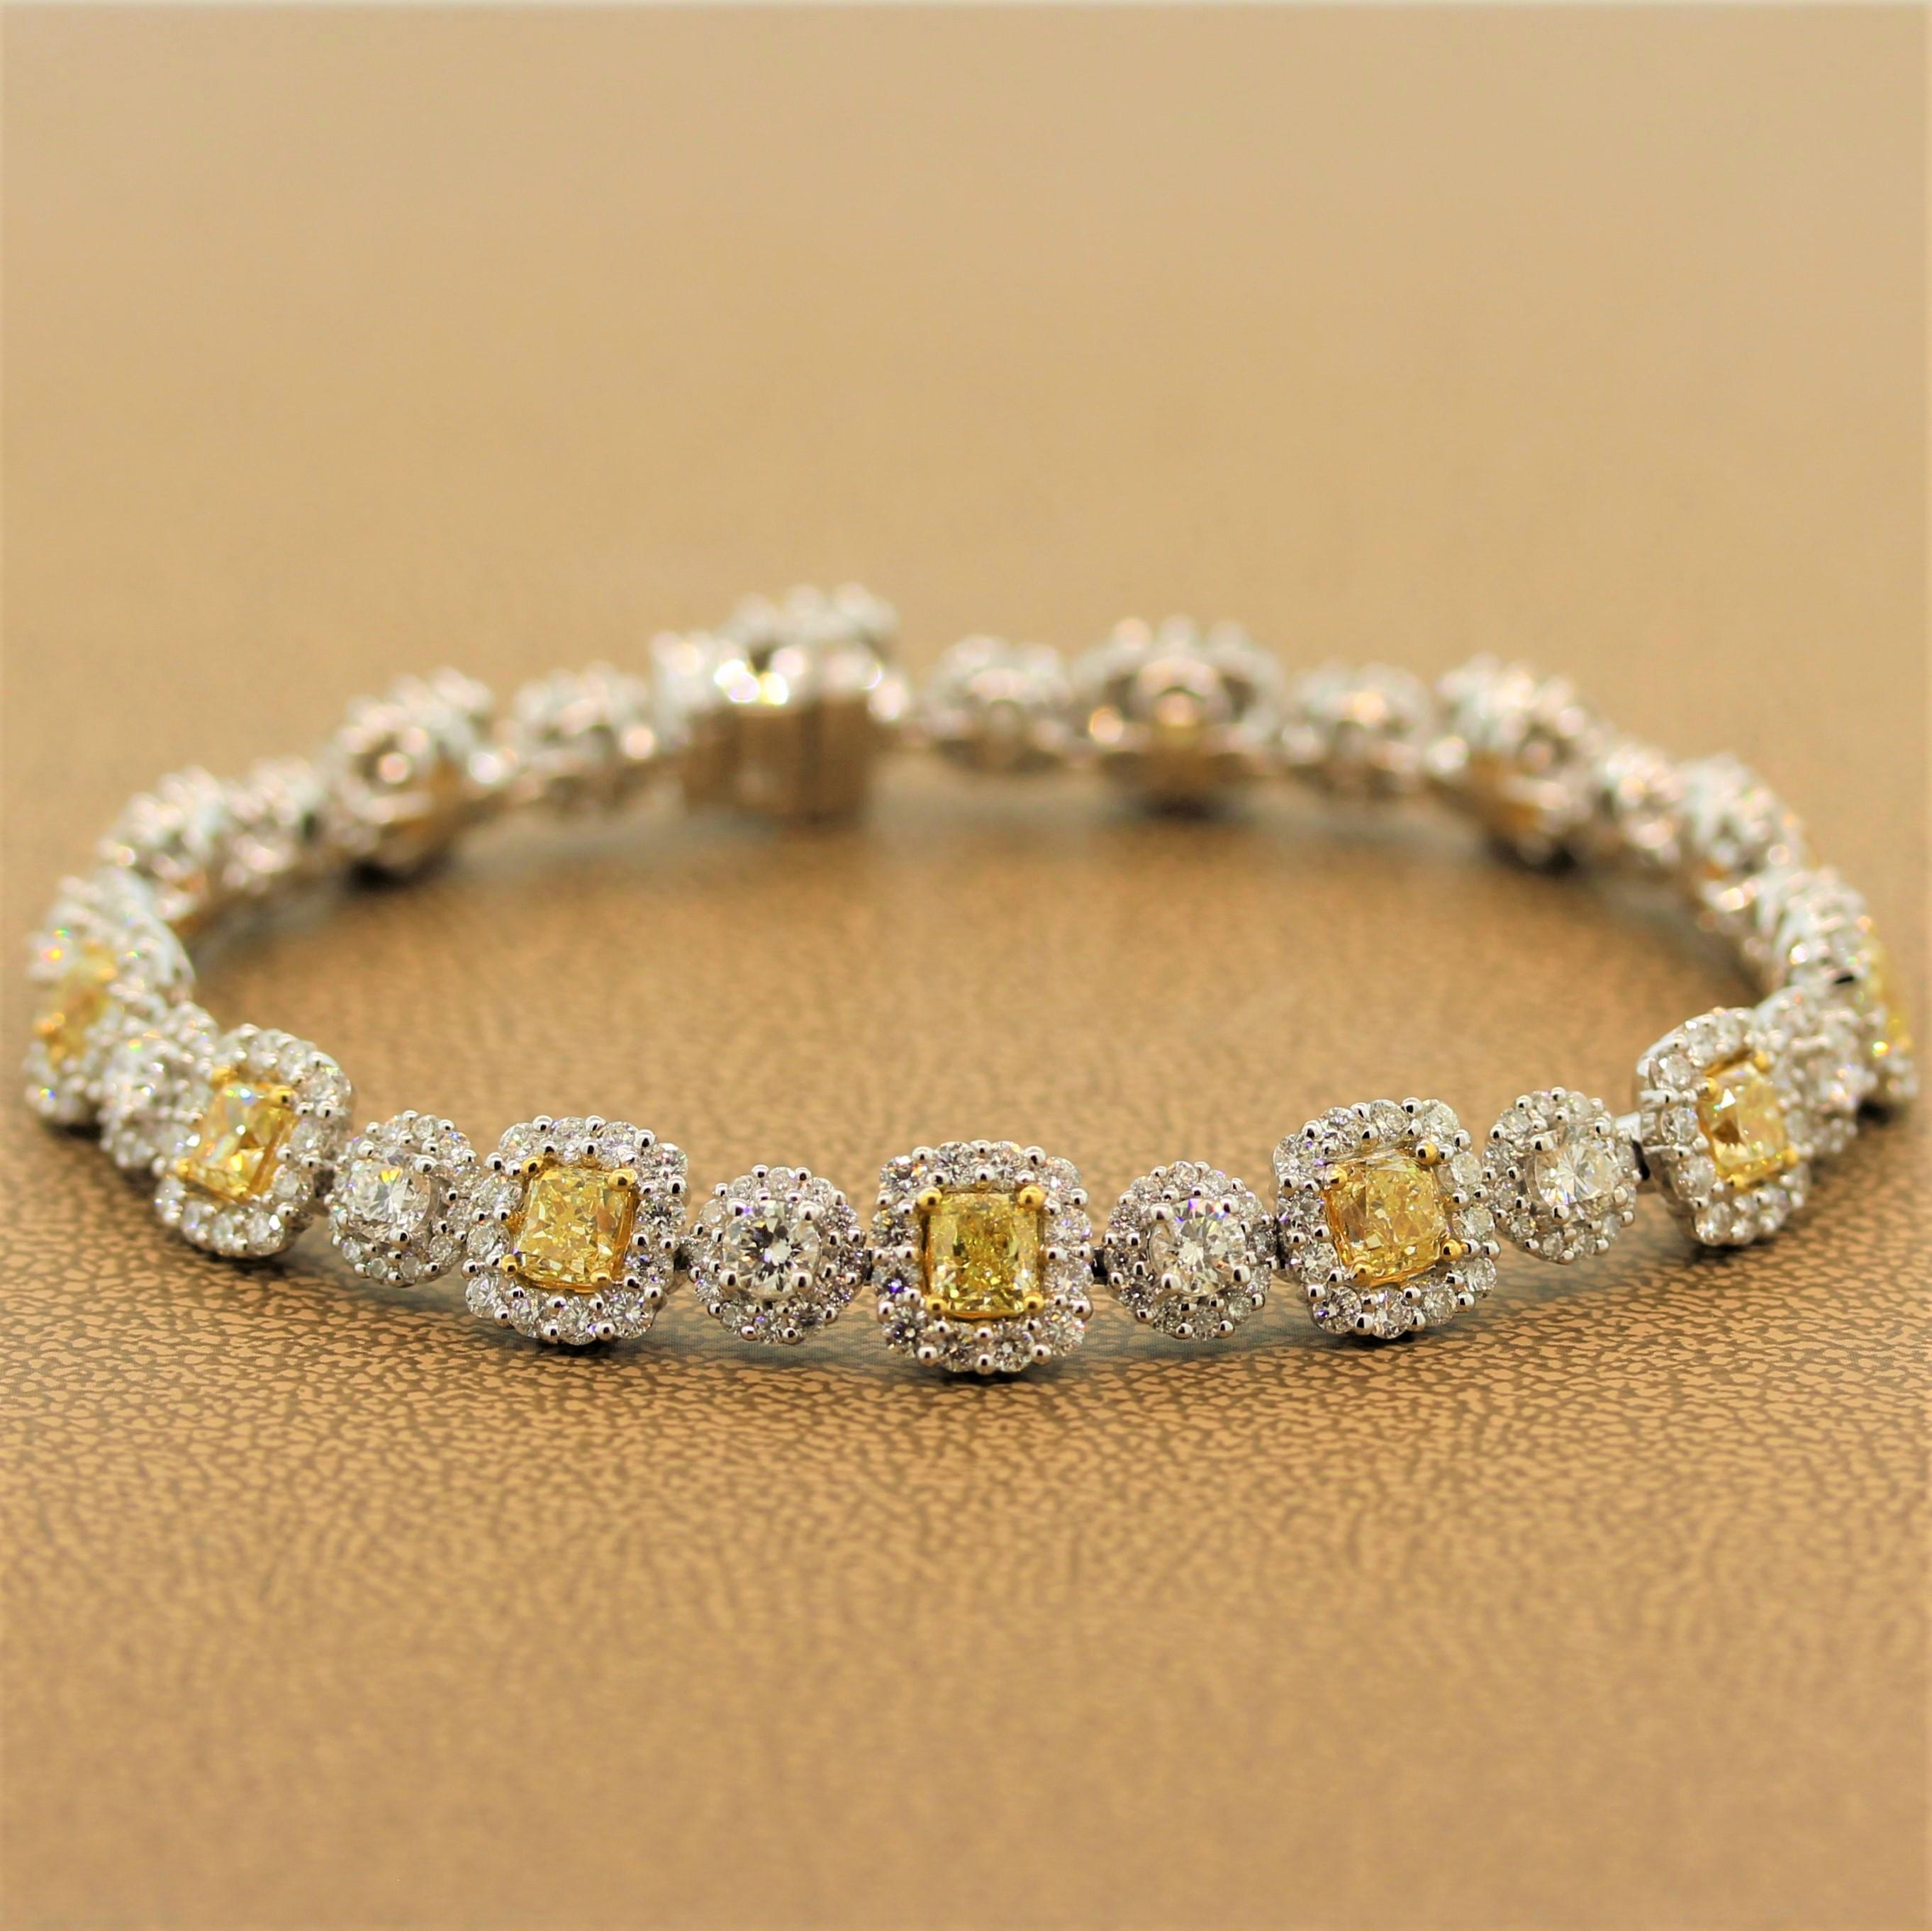 A sleek and sexy tennis bracelet featuring 5.68 carats of fancy yellow cushion cut diamonds, which are enhanced by 7.33 carats of VS quality white diamonds. All set in 18K white gold, the bracelet is blanketed in sparkling diamonds that dance in the